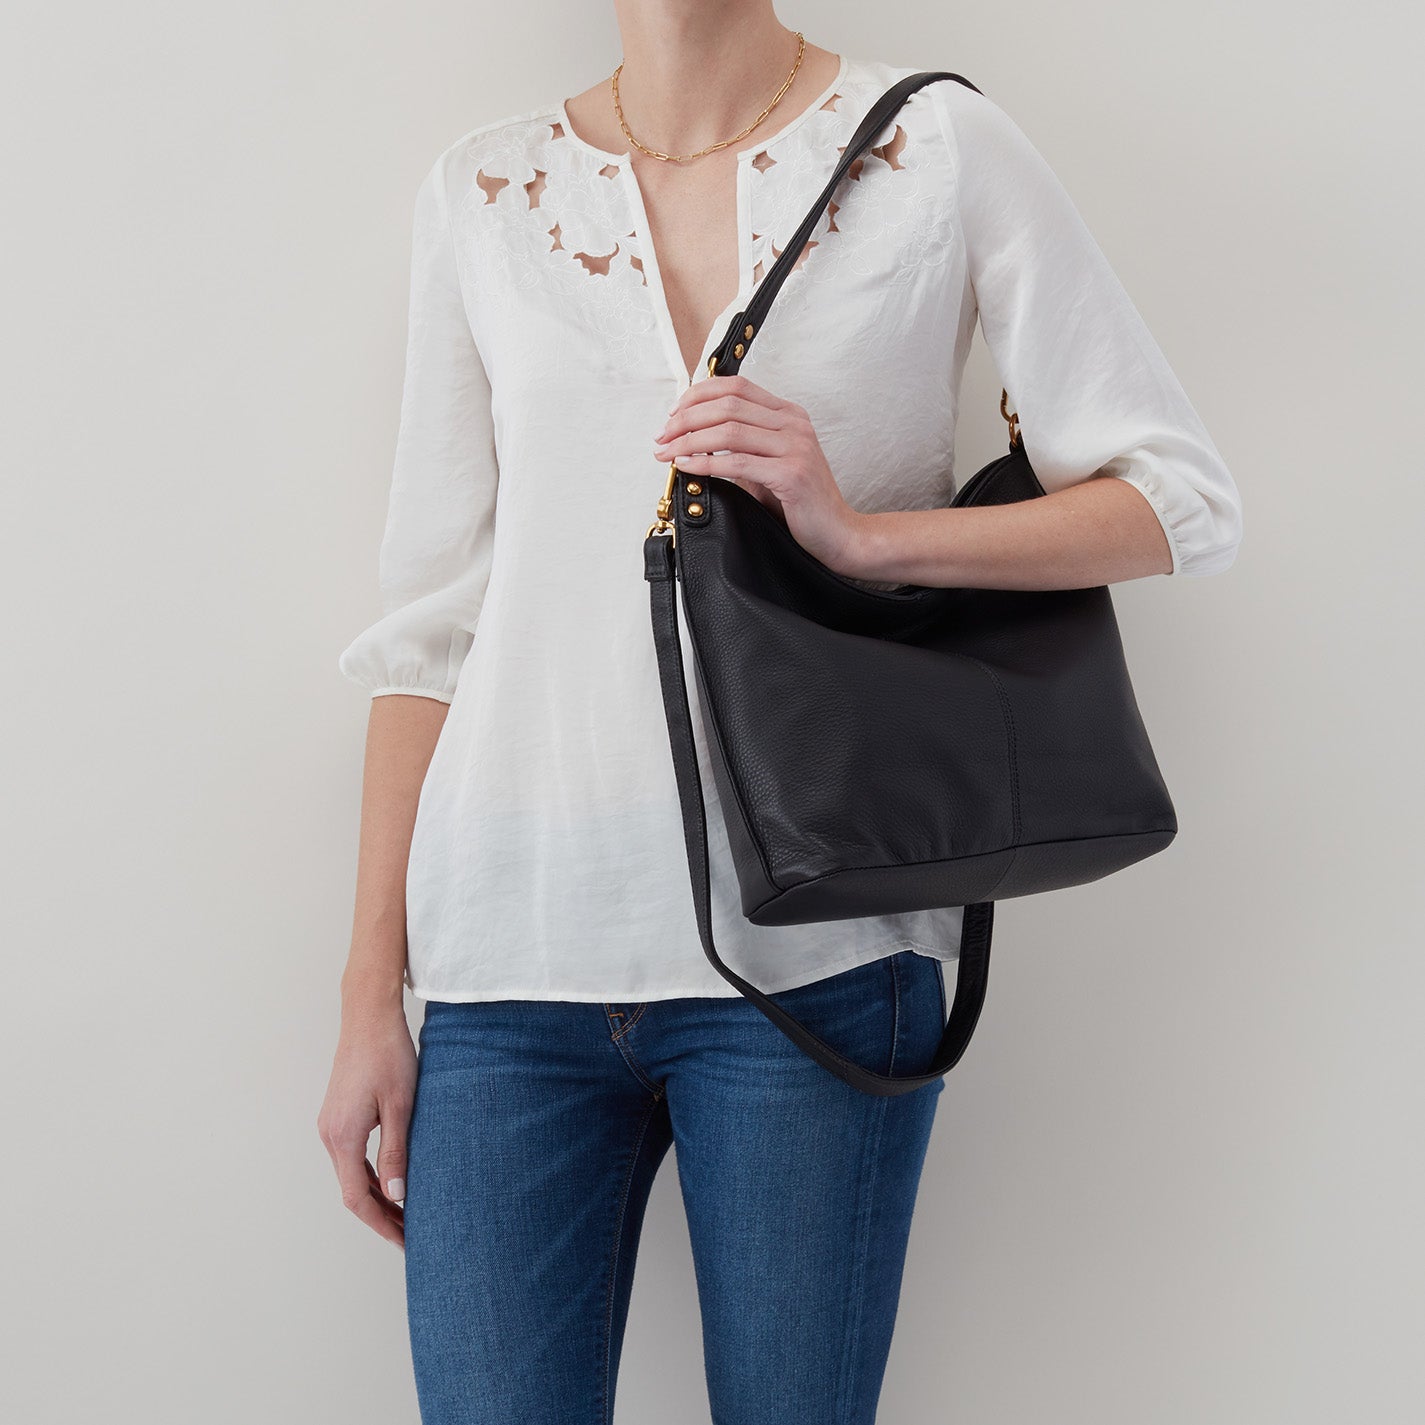 Over Earth Leather Hobo Purses and Handbags for India | Ubuy